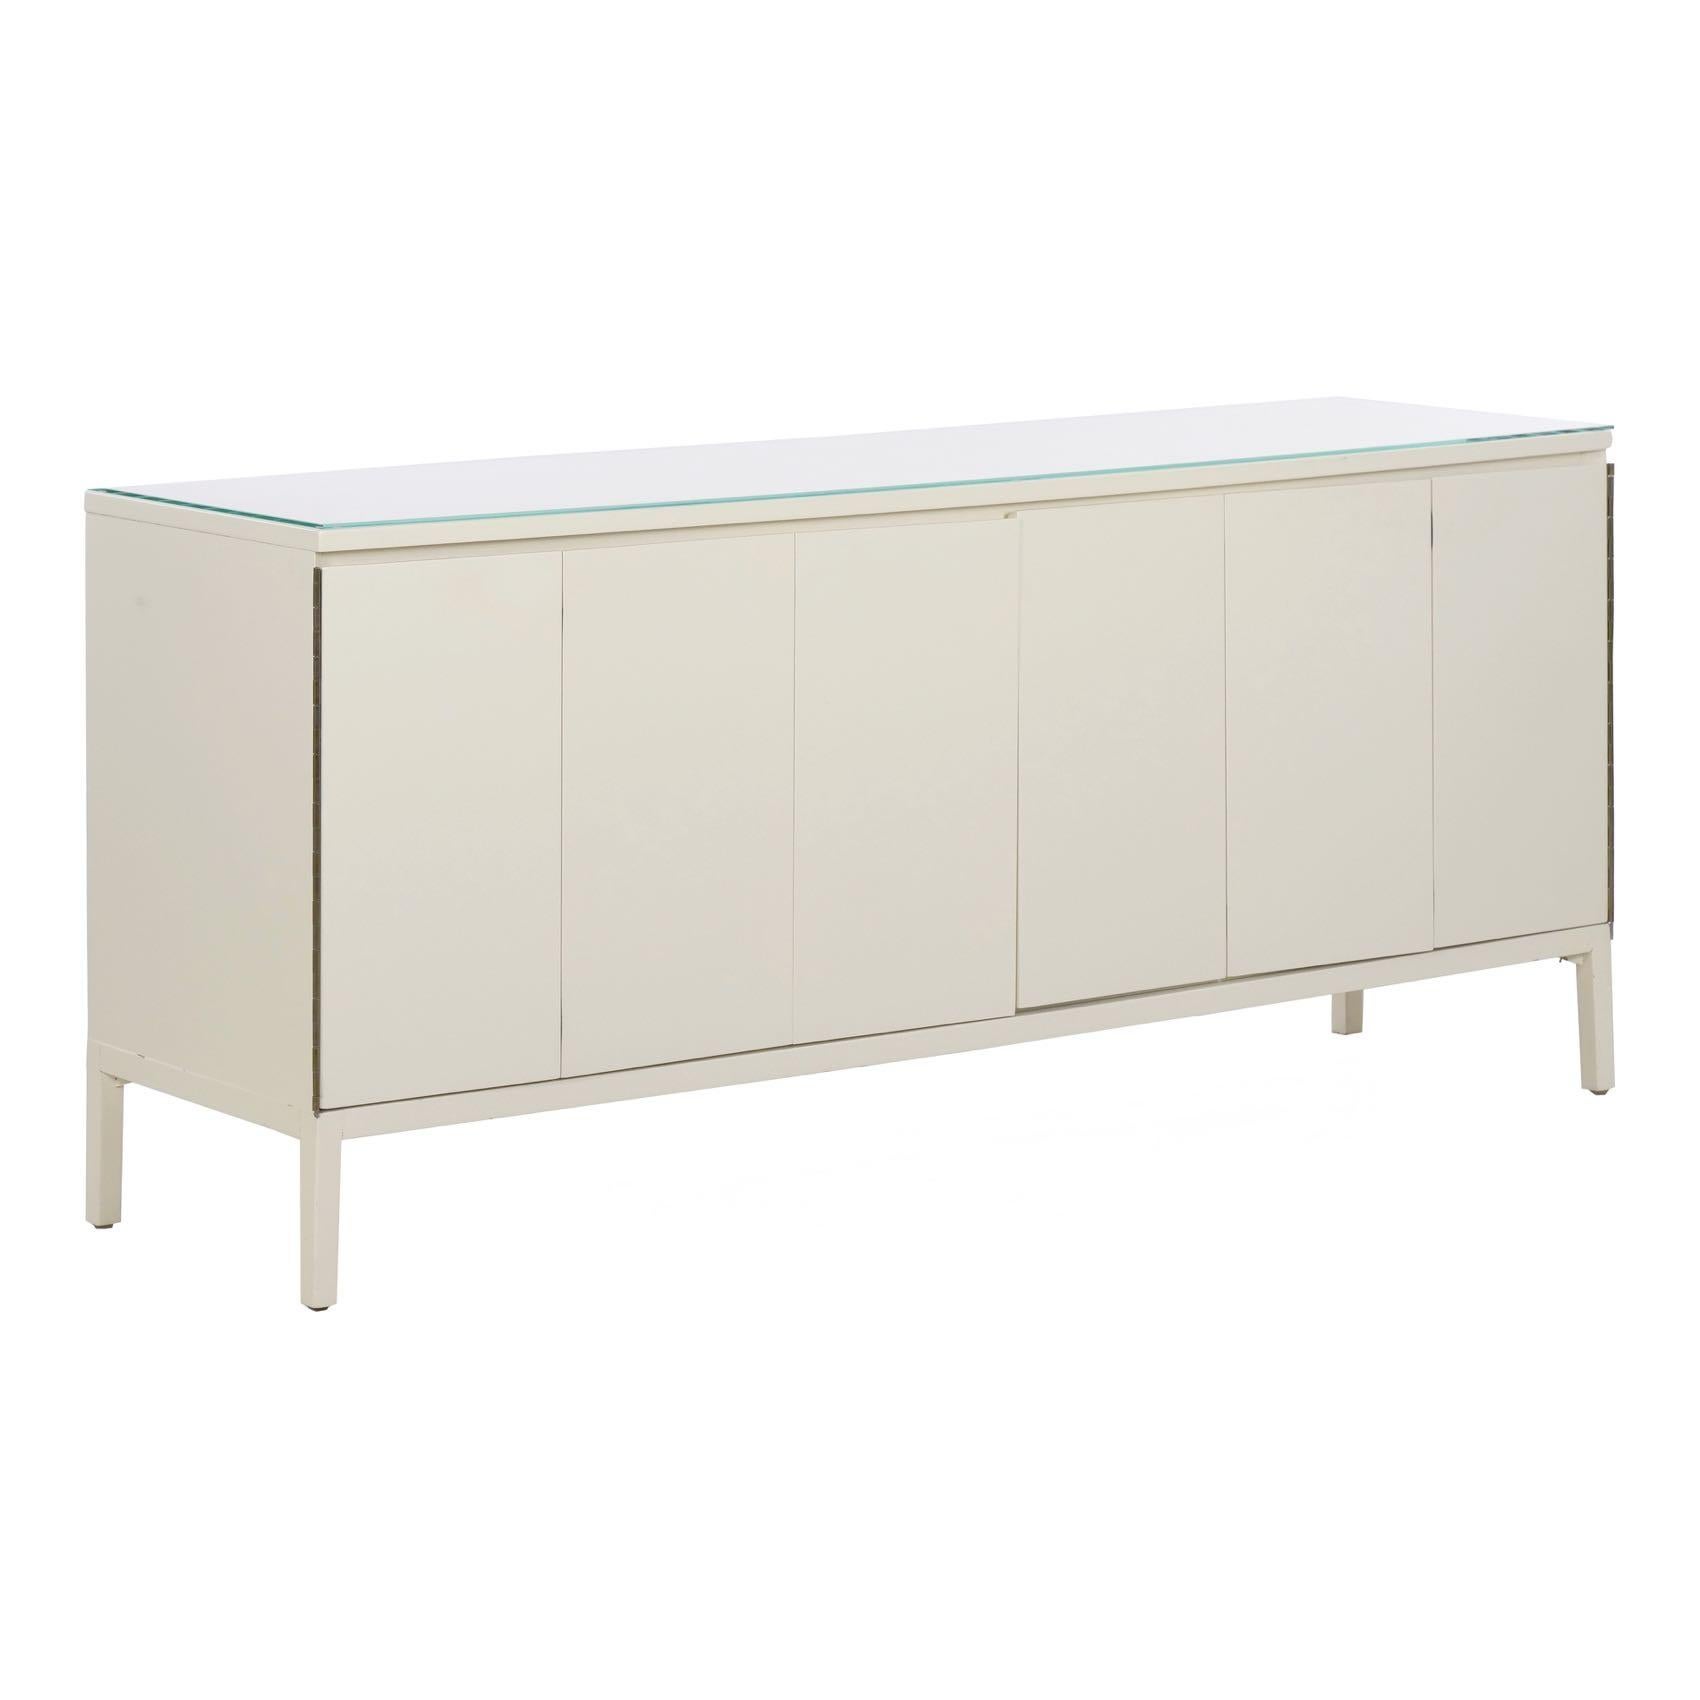 This lovely modernist cabinet is a picture of simplicity and austerity. Finished in a hard white lacquer and topped by a piece of clear glass, the credenza doors swing outward on full length hinges to reveal a series of eight drawers. All are